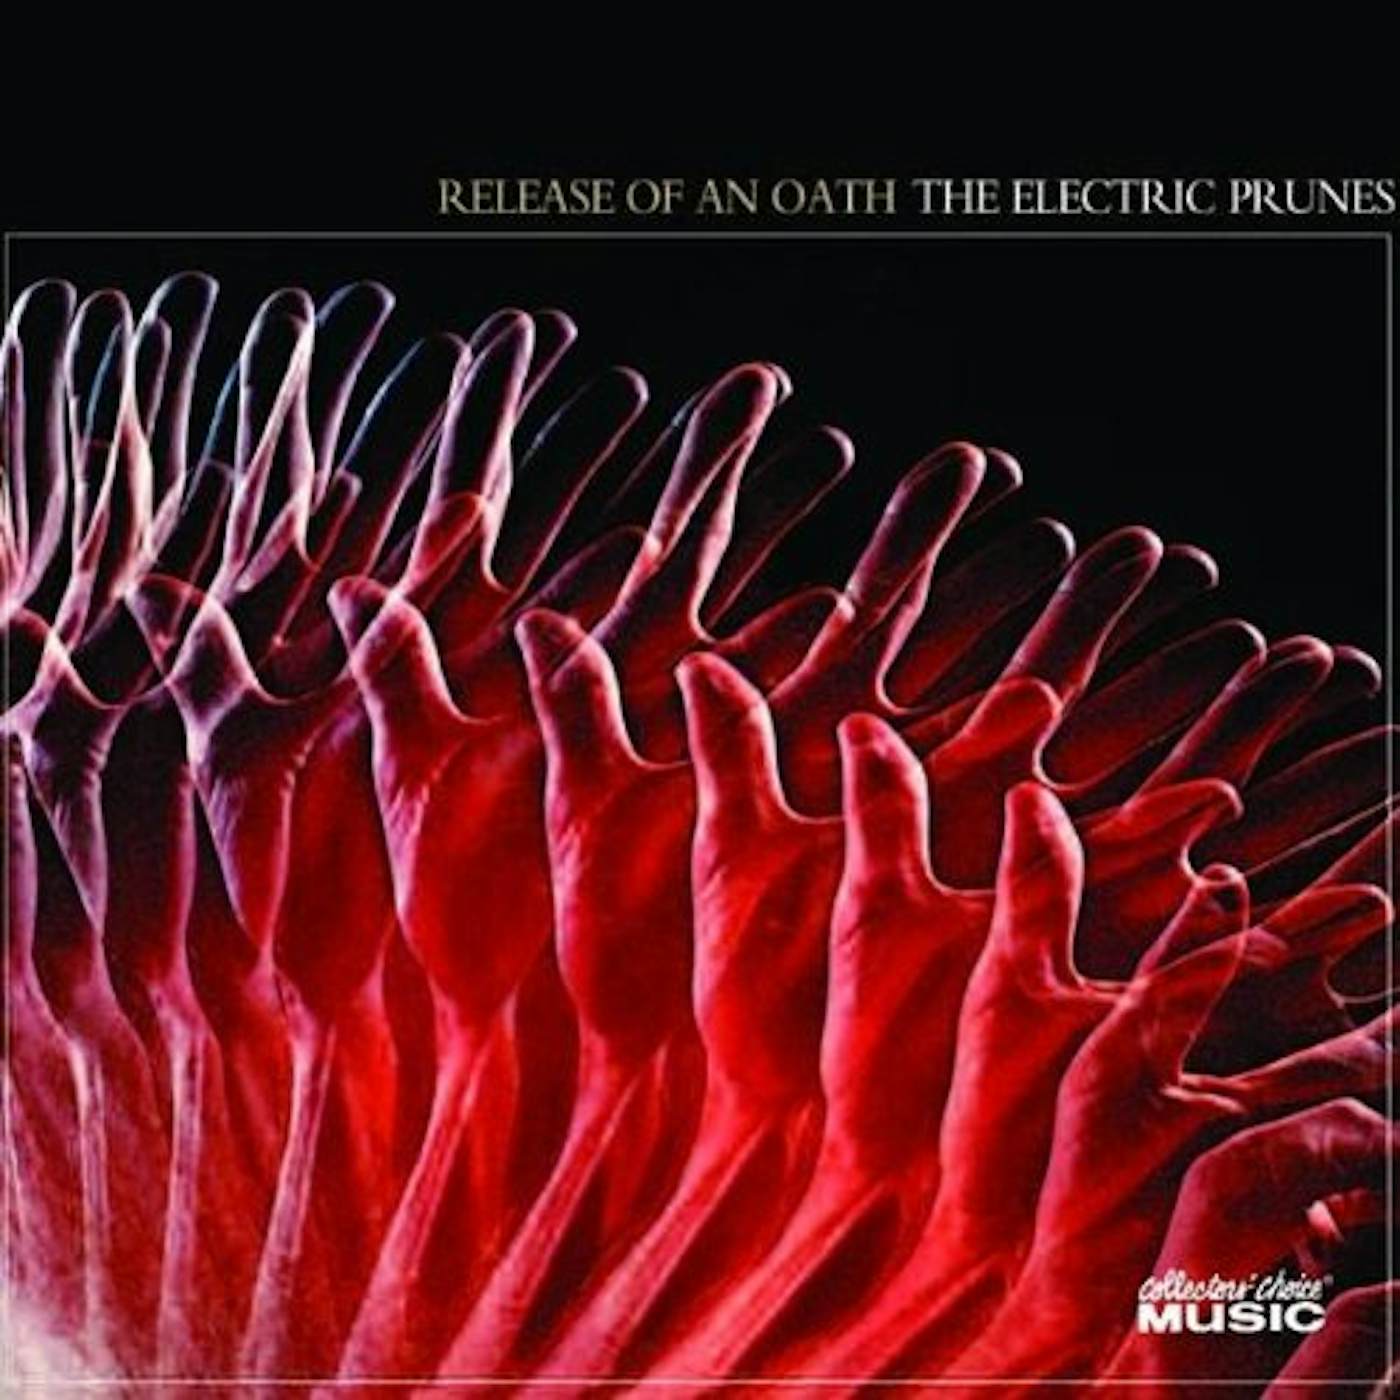 The Electric Prunes Release Of An Oath Vinyl Record